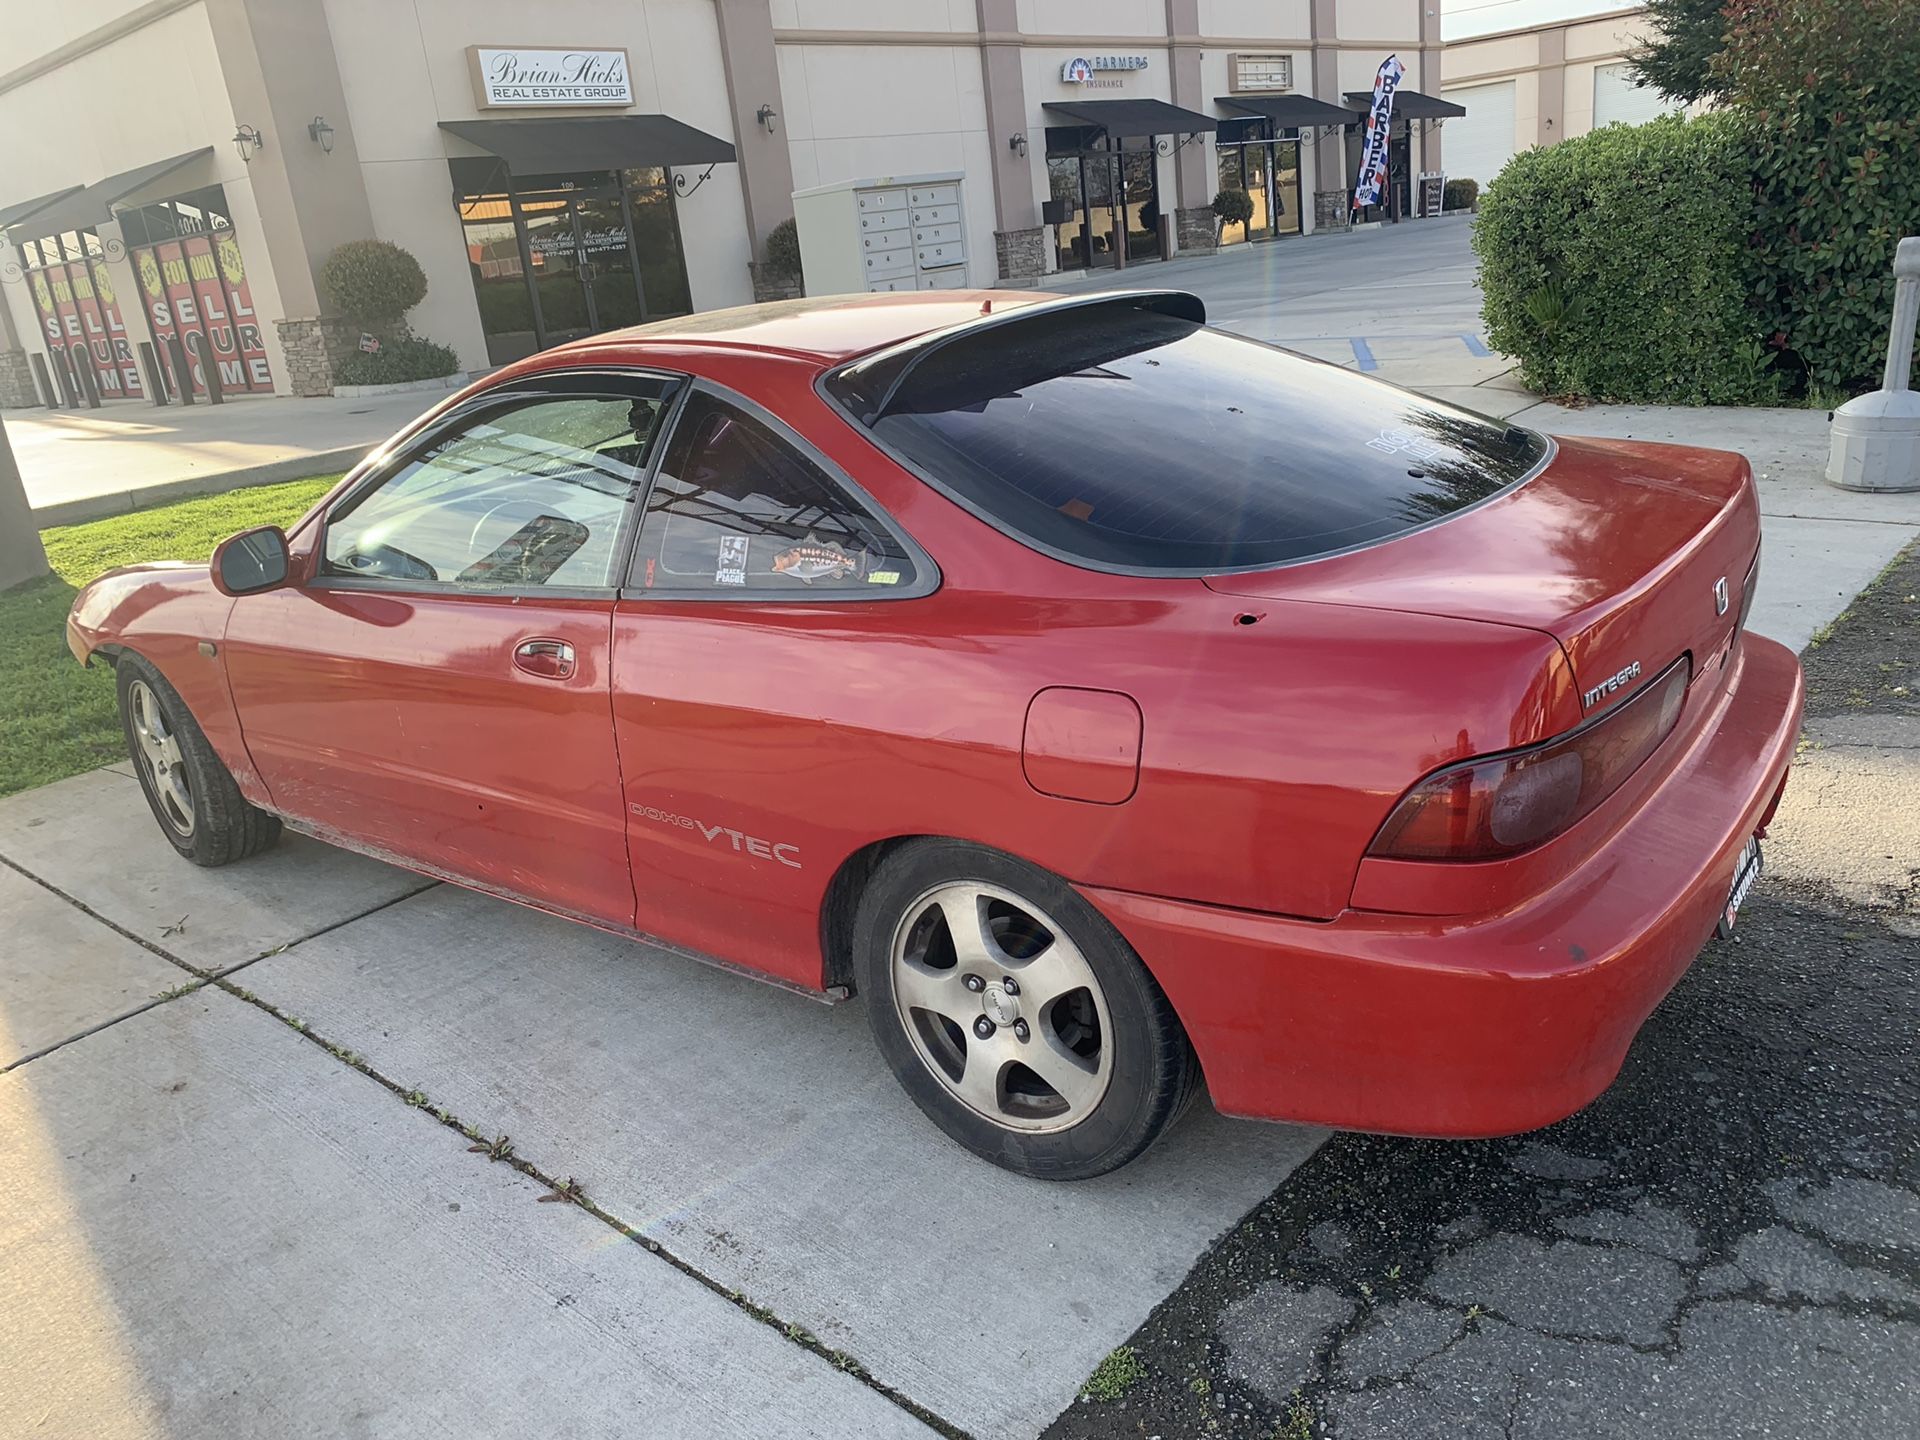 Integra part out